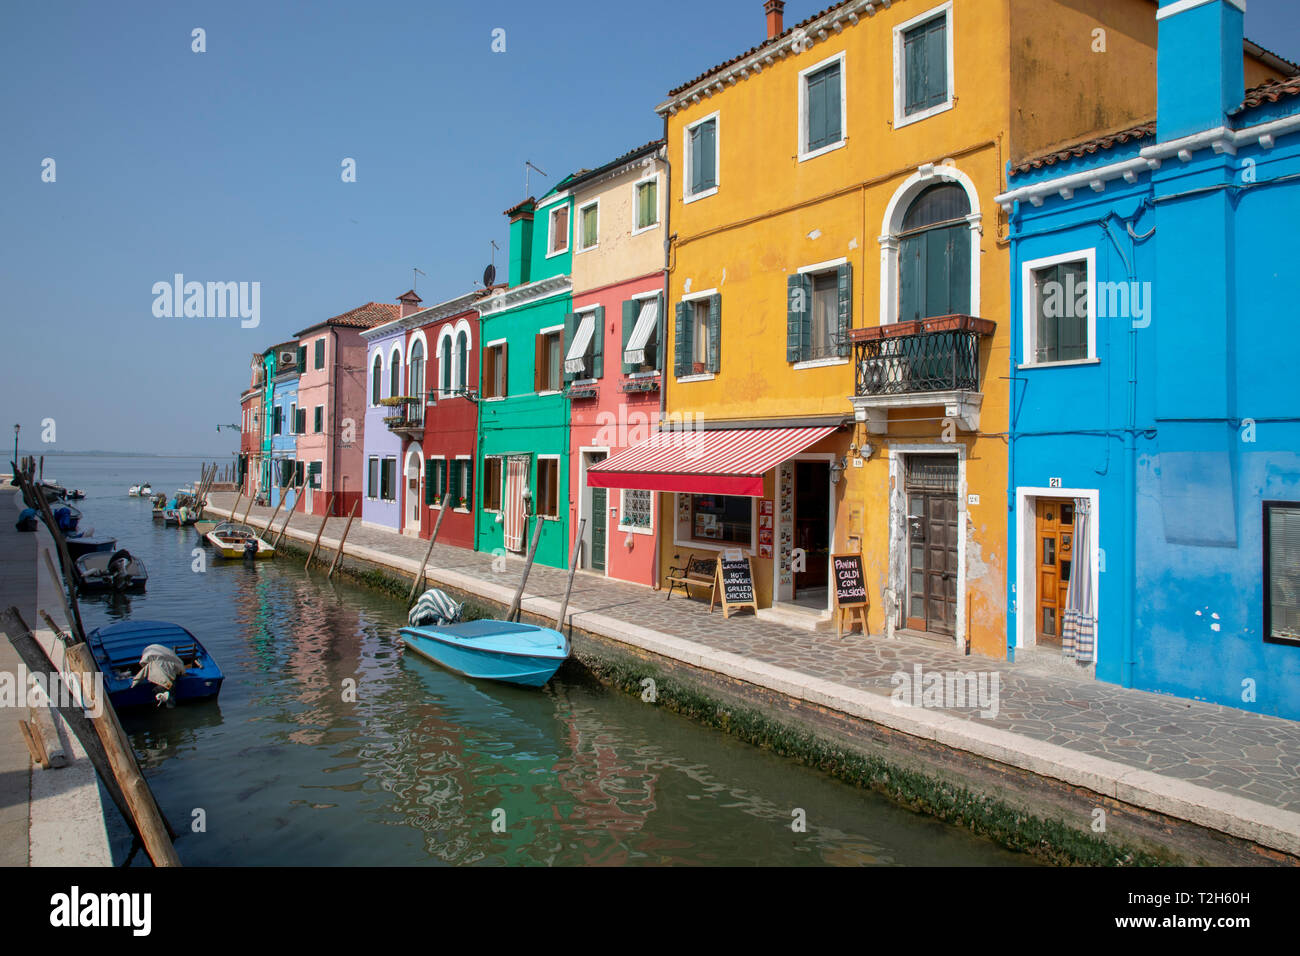 Colorful buildings on canal in Burano, Italy, Europe Stock Photo